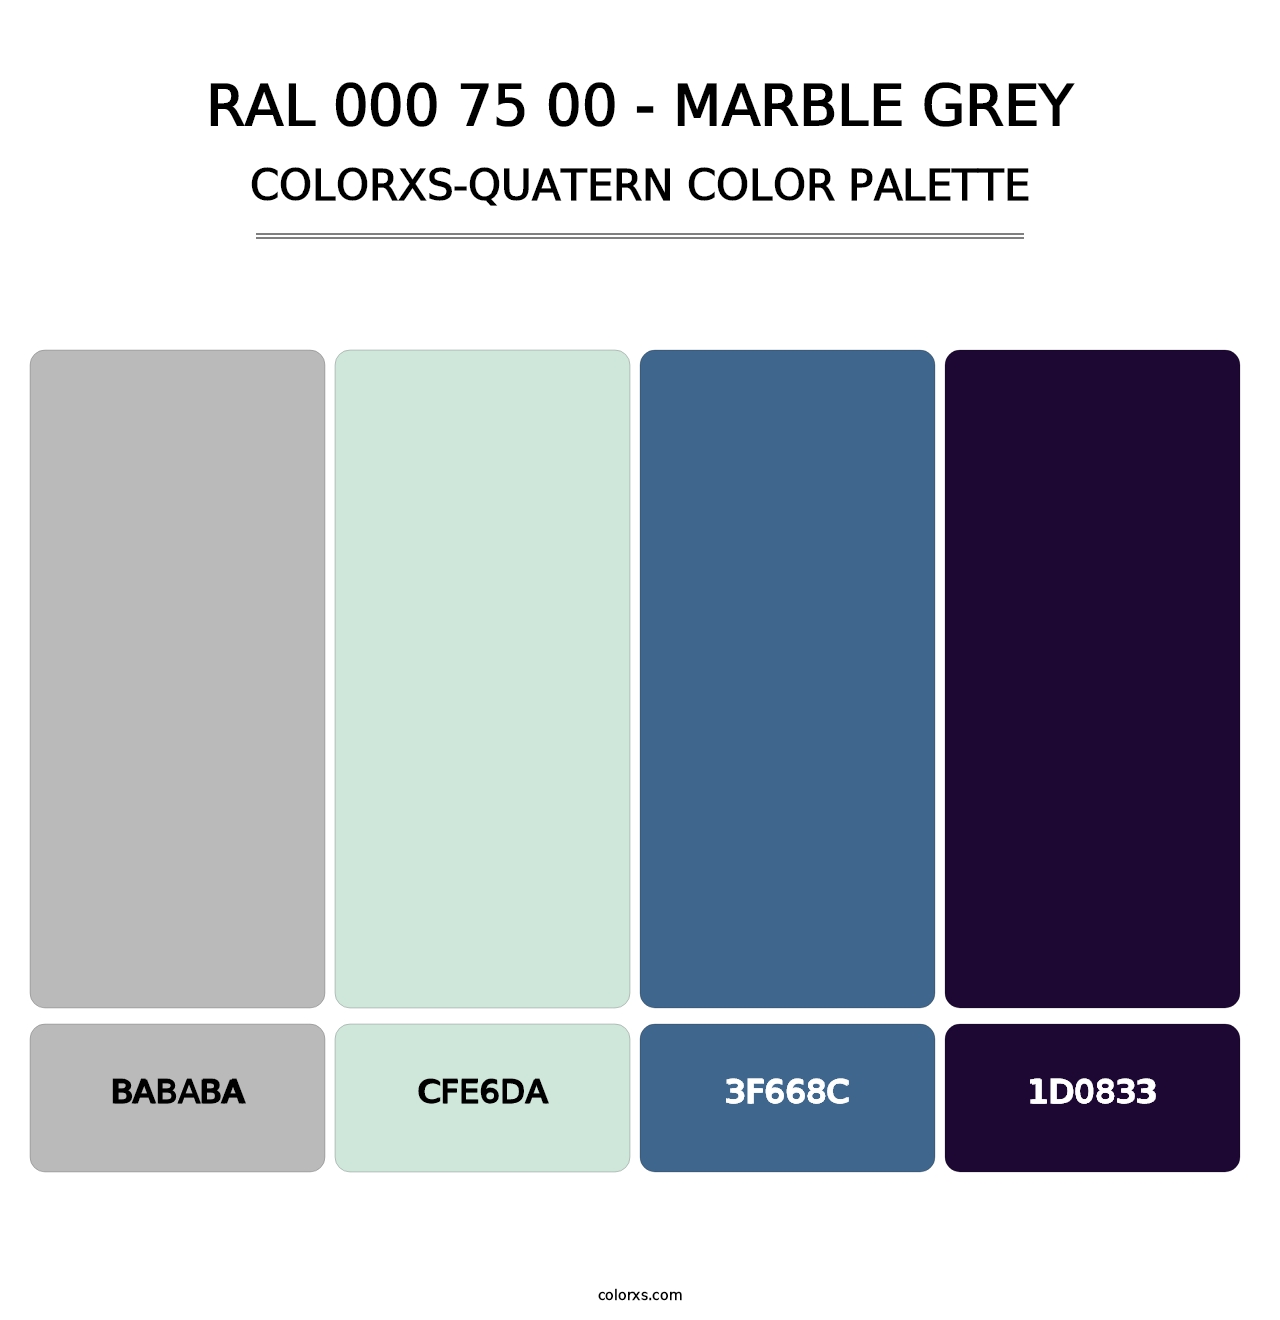 RAL 000 75 00 - Marble Grey - Colorxs Quatern Palette